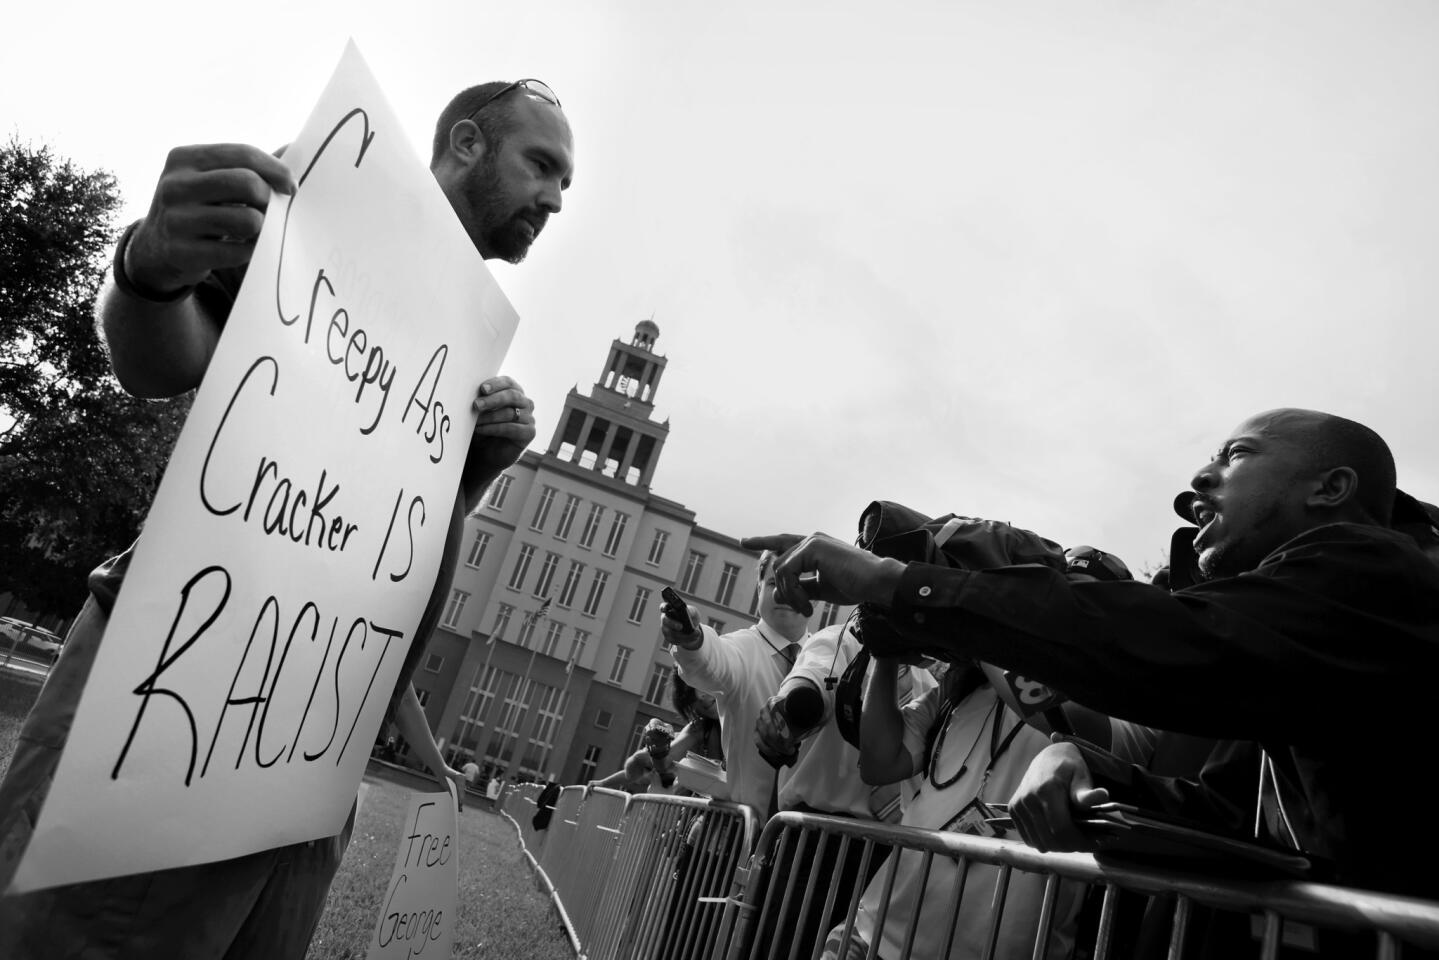 Adam Teasley holds a sign in support of George Zimmermanhe as he debates H. Alexander Duncan, right, on Friday, July 12, 2013 outside of the Seminole County Criminal Justice Center.